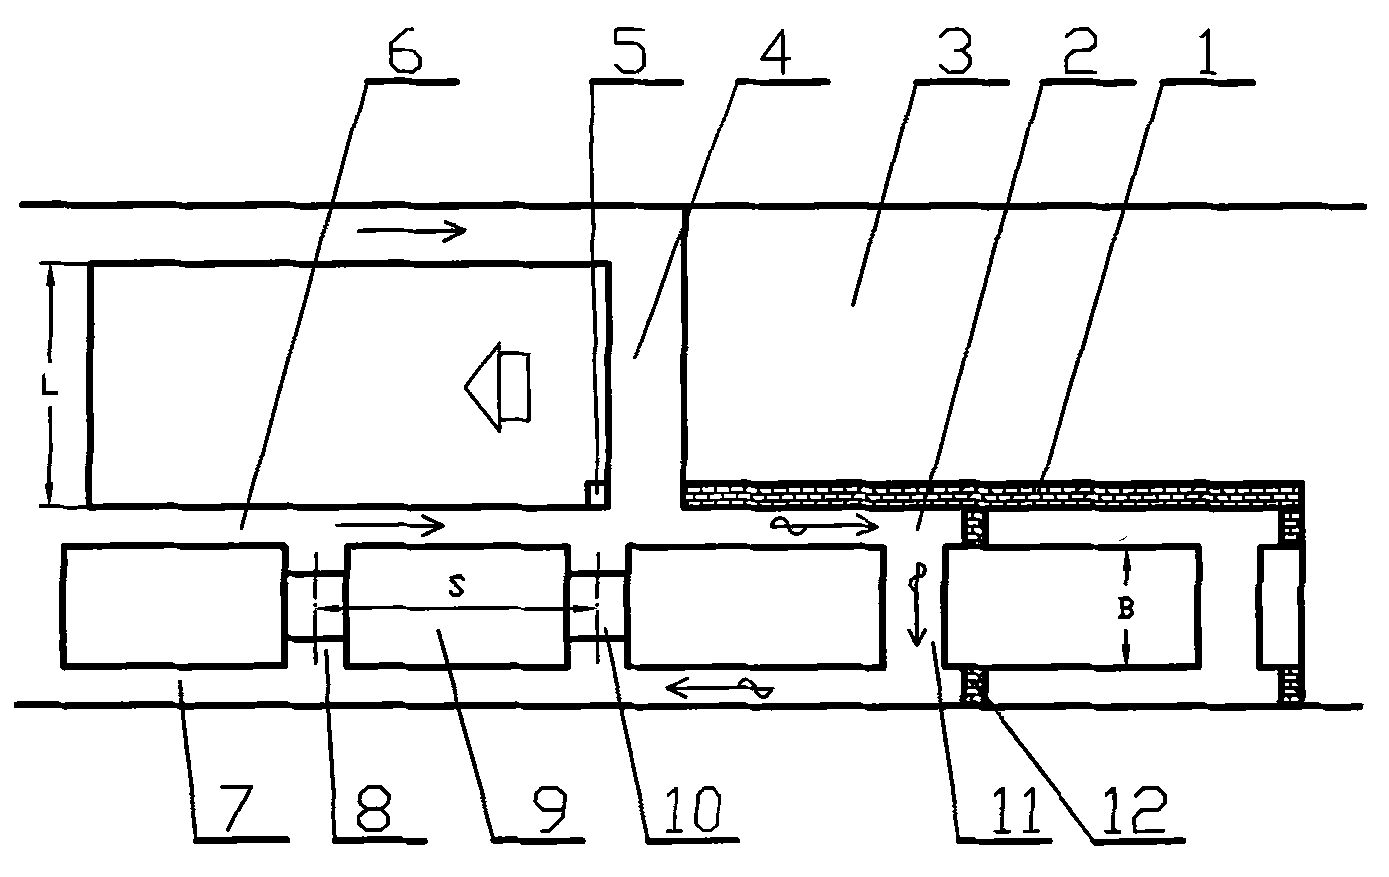 Short-section temporary gob-side entry retaining method